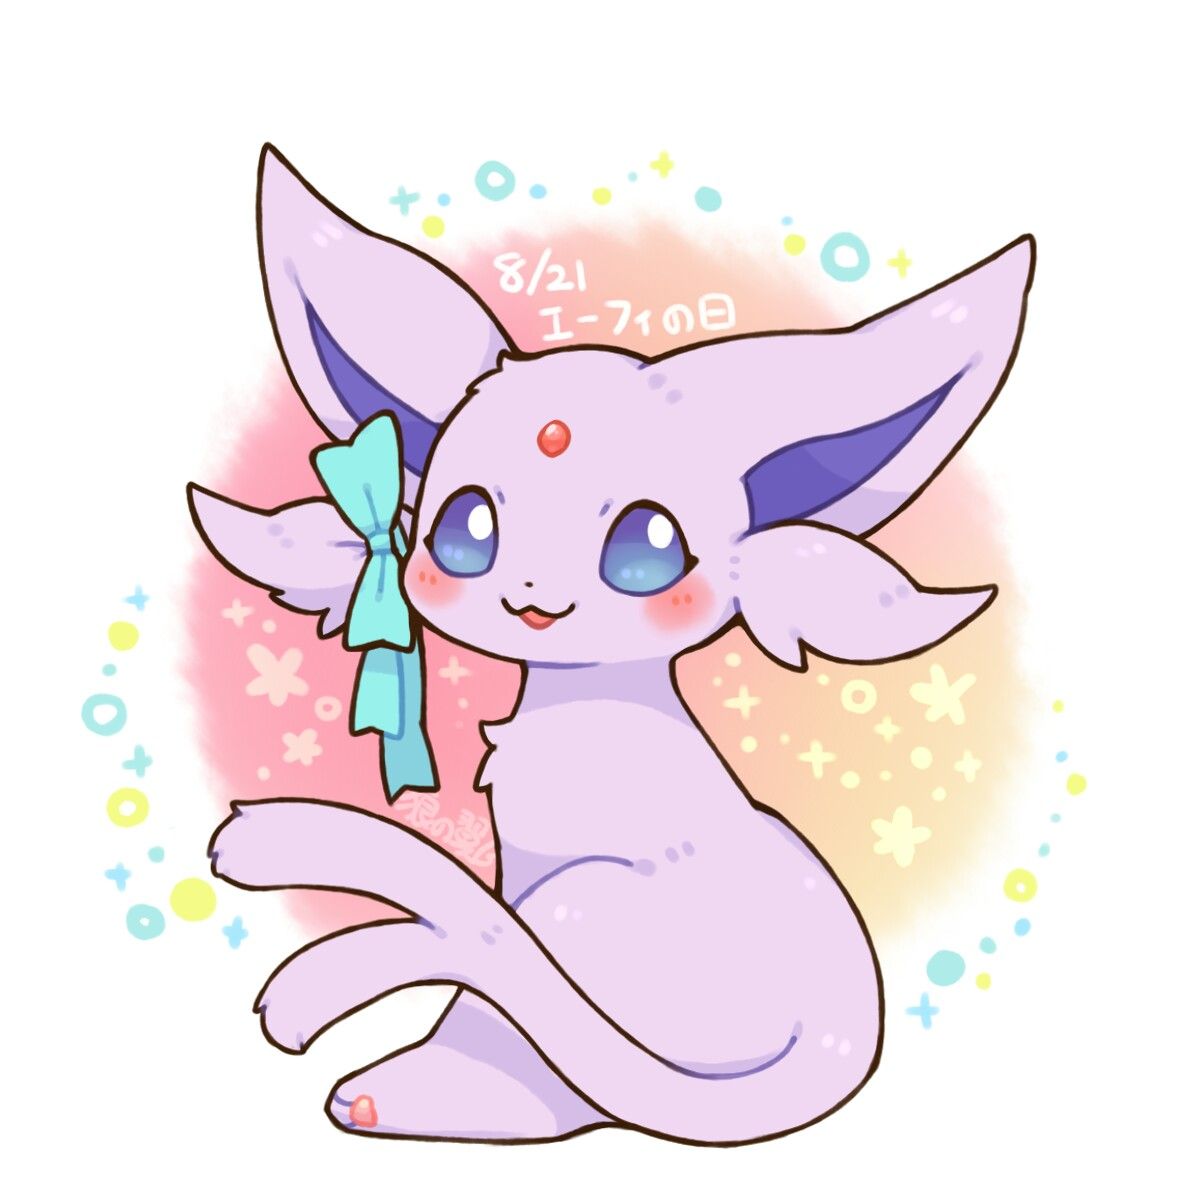 Cute Espeon Wallpapers Wallpapers